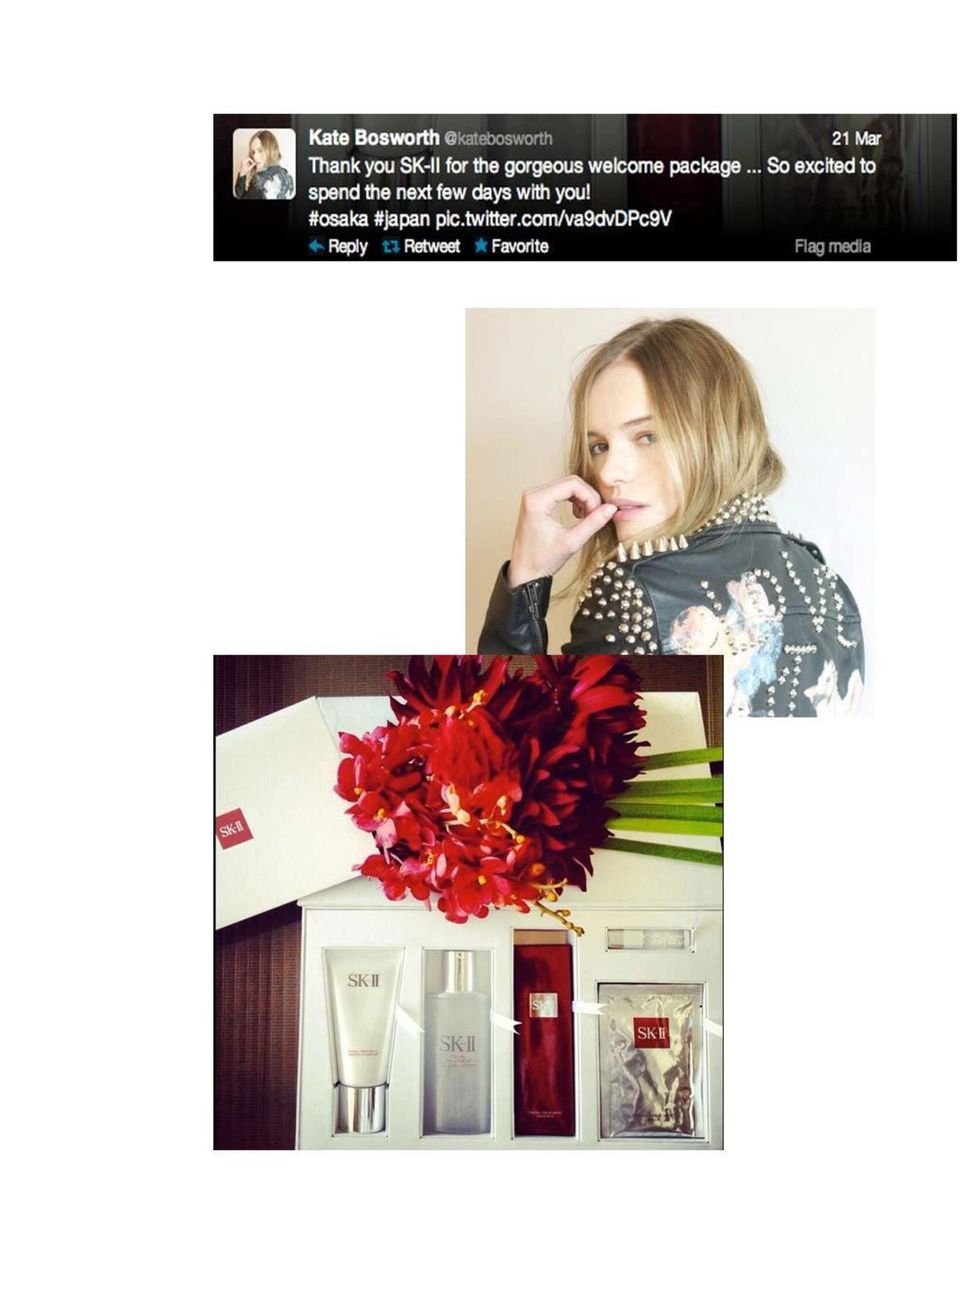 <p><a href="http://www.elleuk.com/star-style/news/could-topshop-s-mystery-campaign-girl-be-kate-bosworth">Kate Bosworth</a></p><p>Thank you SK-II for the gorgeous welcome package... So excited to spend the next few days with you!</p>